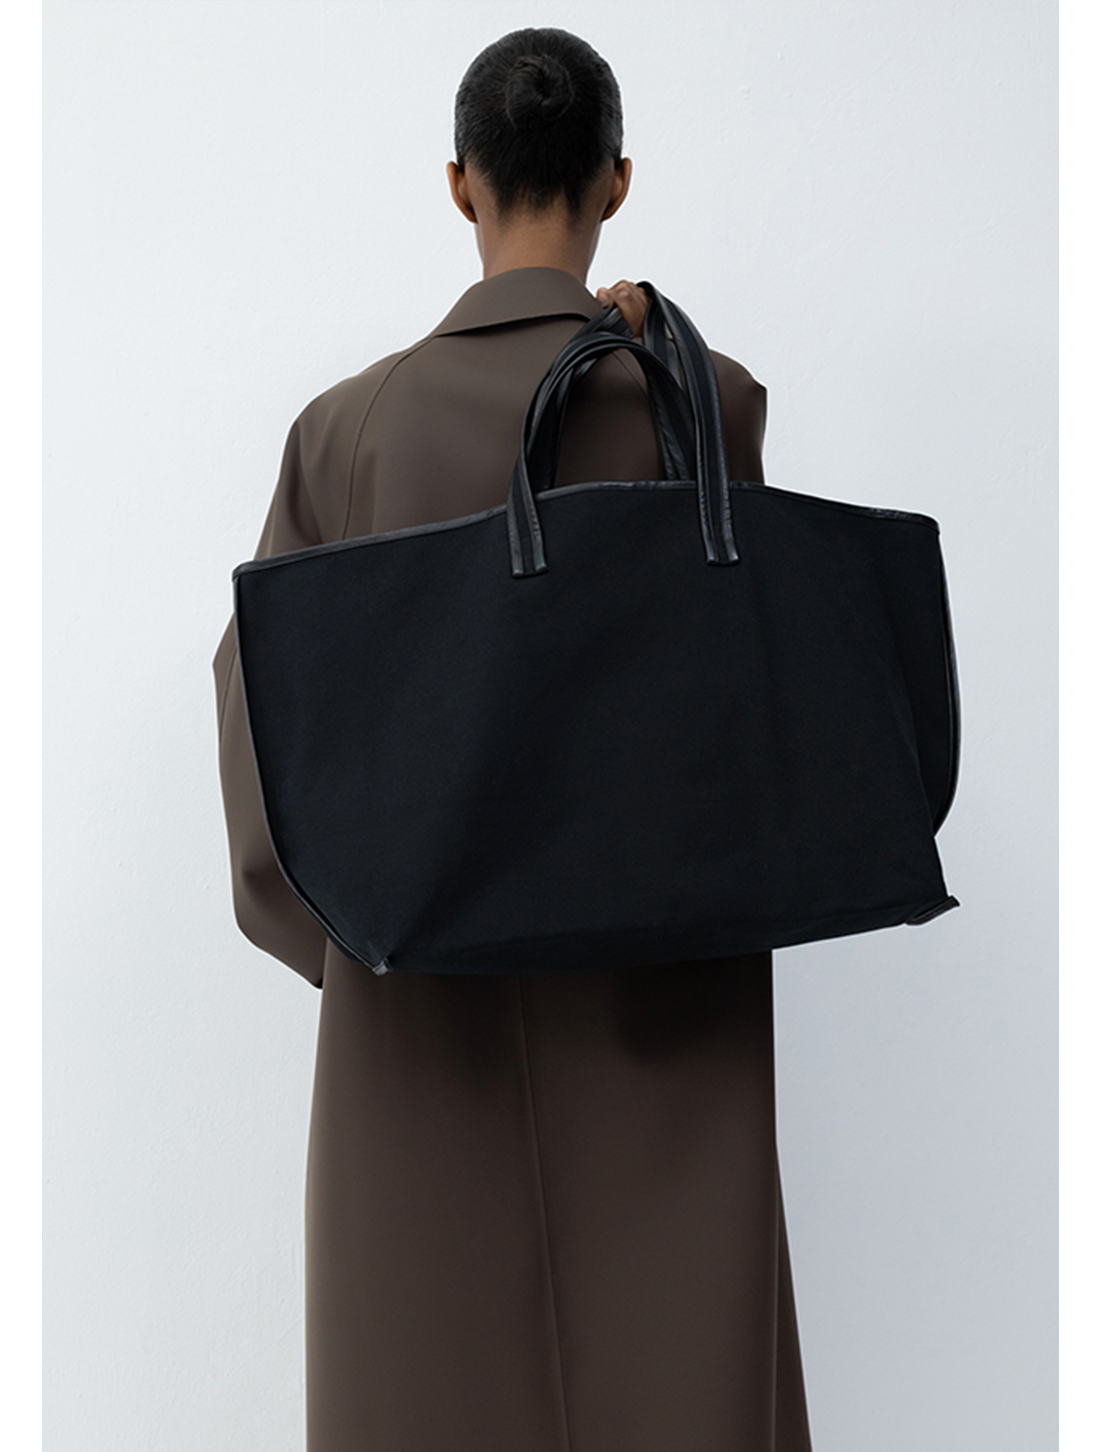 Introducing — The New Tote by Kassl